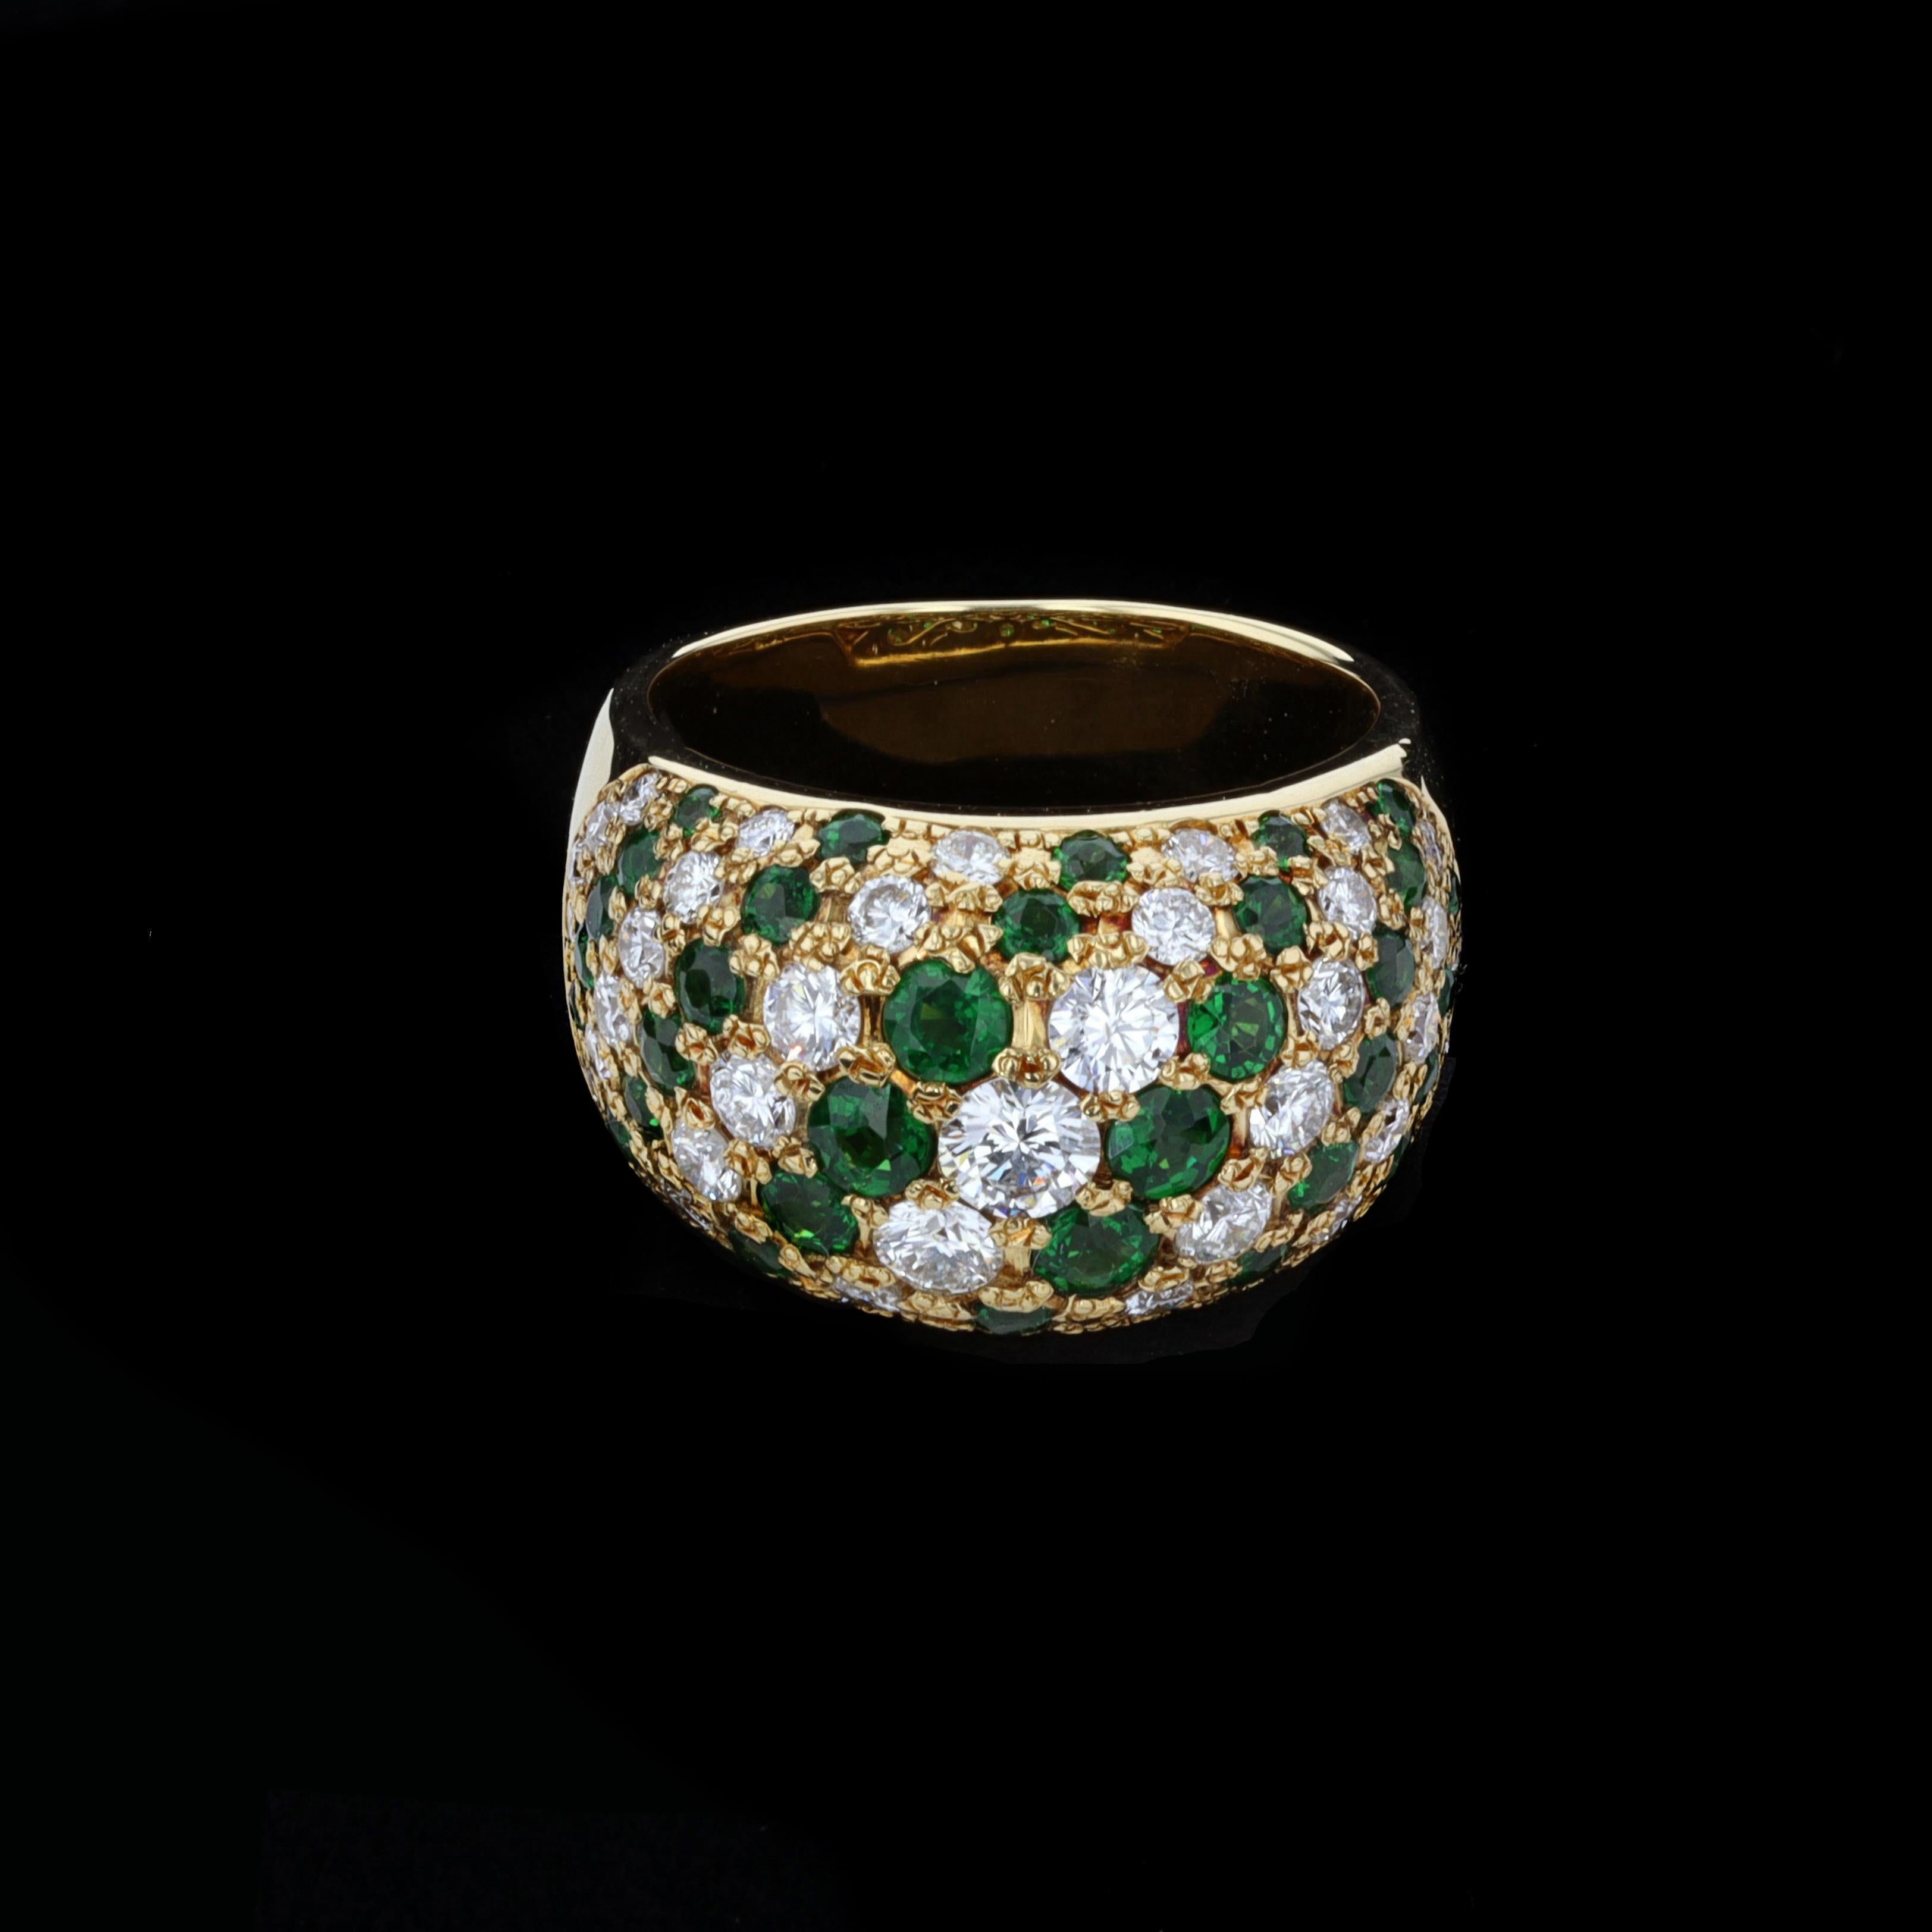 Intricate and Elegant 1.43ct Diamond 1.80ct Emerald 18k Yellow Gold Ring. The ring is set with sparkling round cut diamonds that weigh approximately 1.43ct. The color of these diamonds is F with VS1 clarity. The diamonds are accentuated by lovely